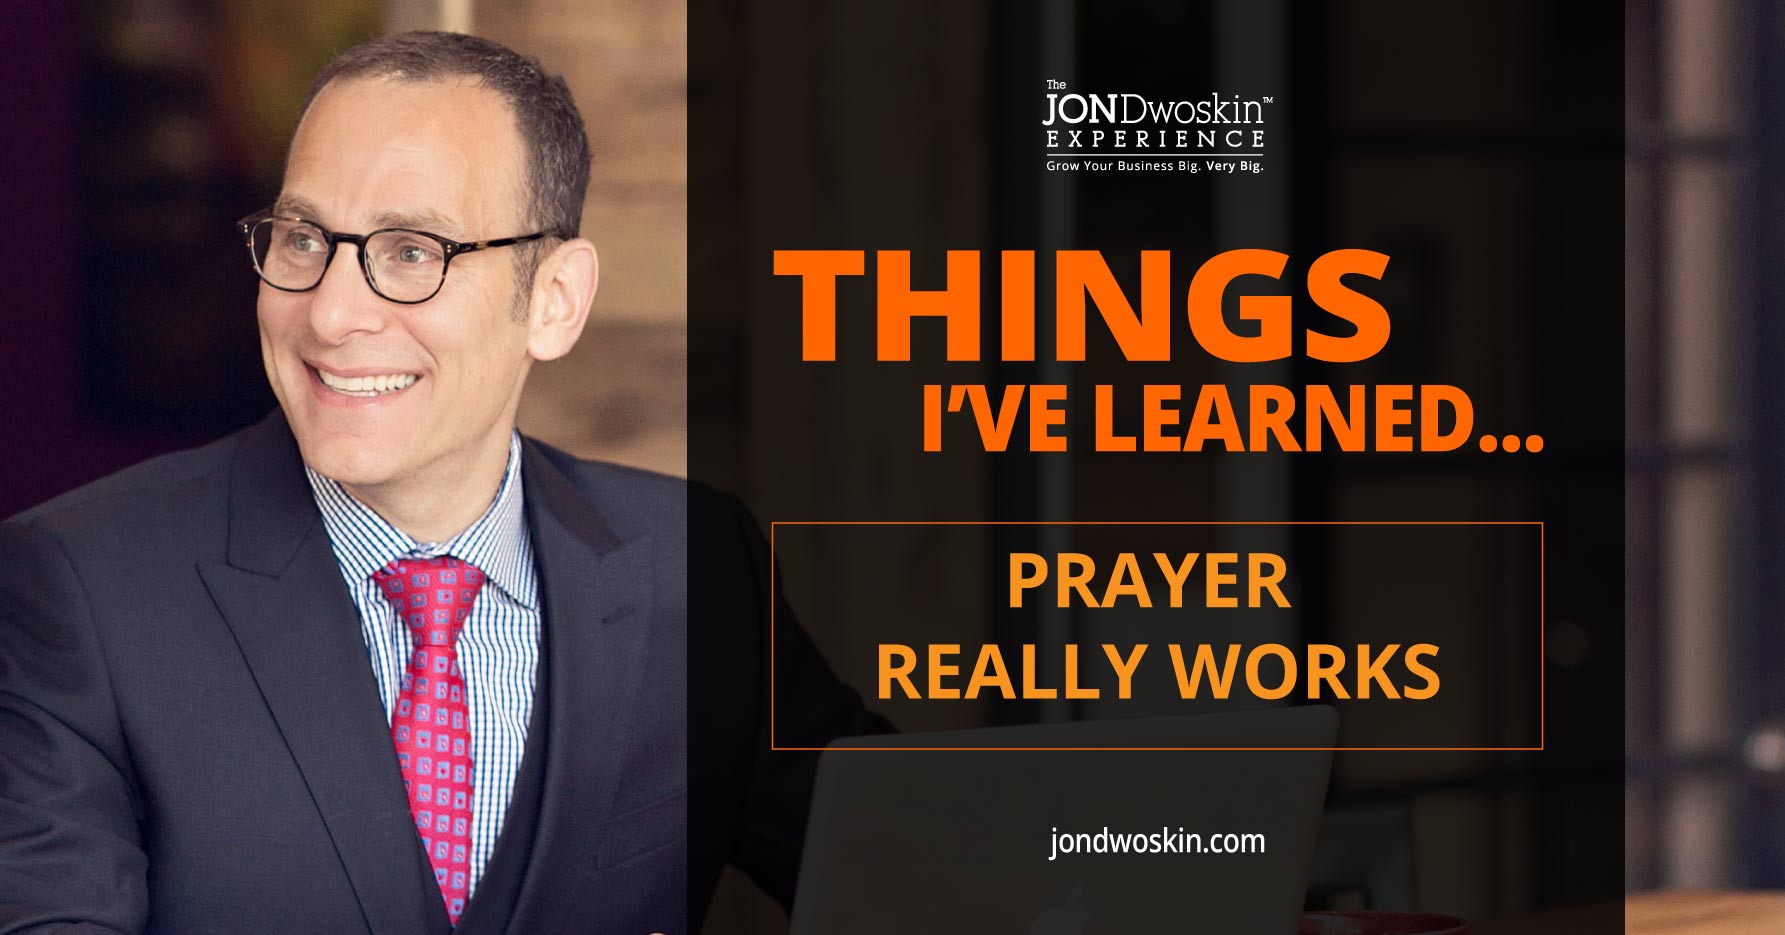 5 Things I’ve Learned in My 50 Years: Prayer Really Works